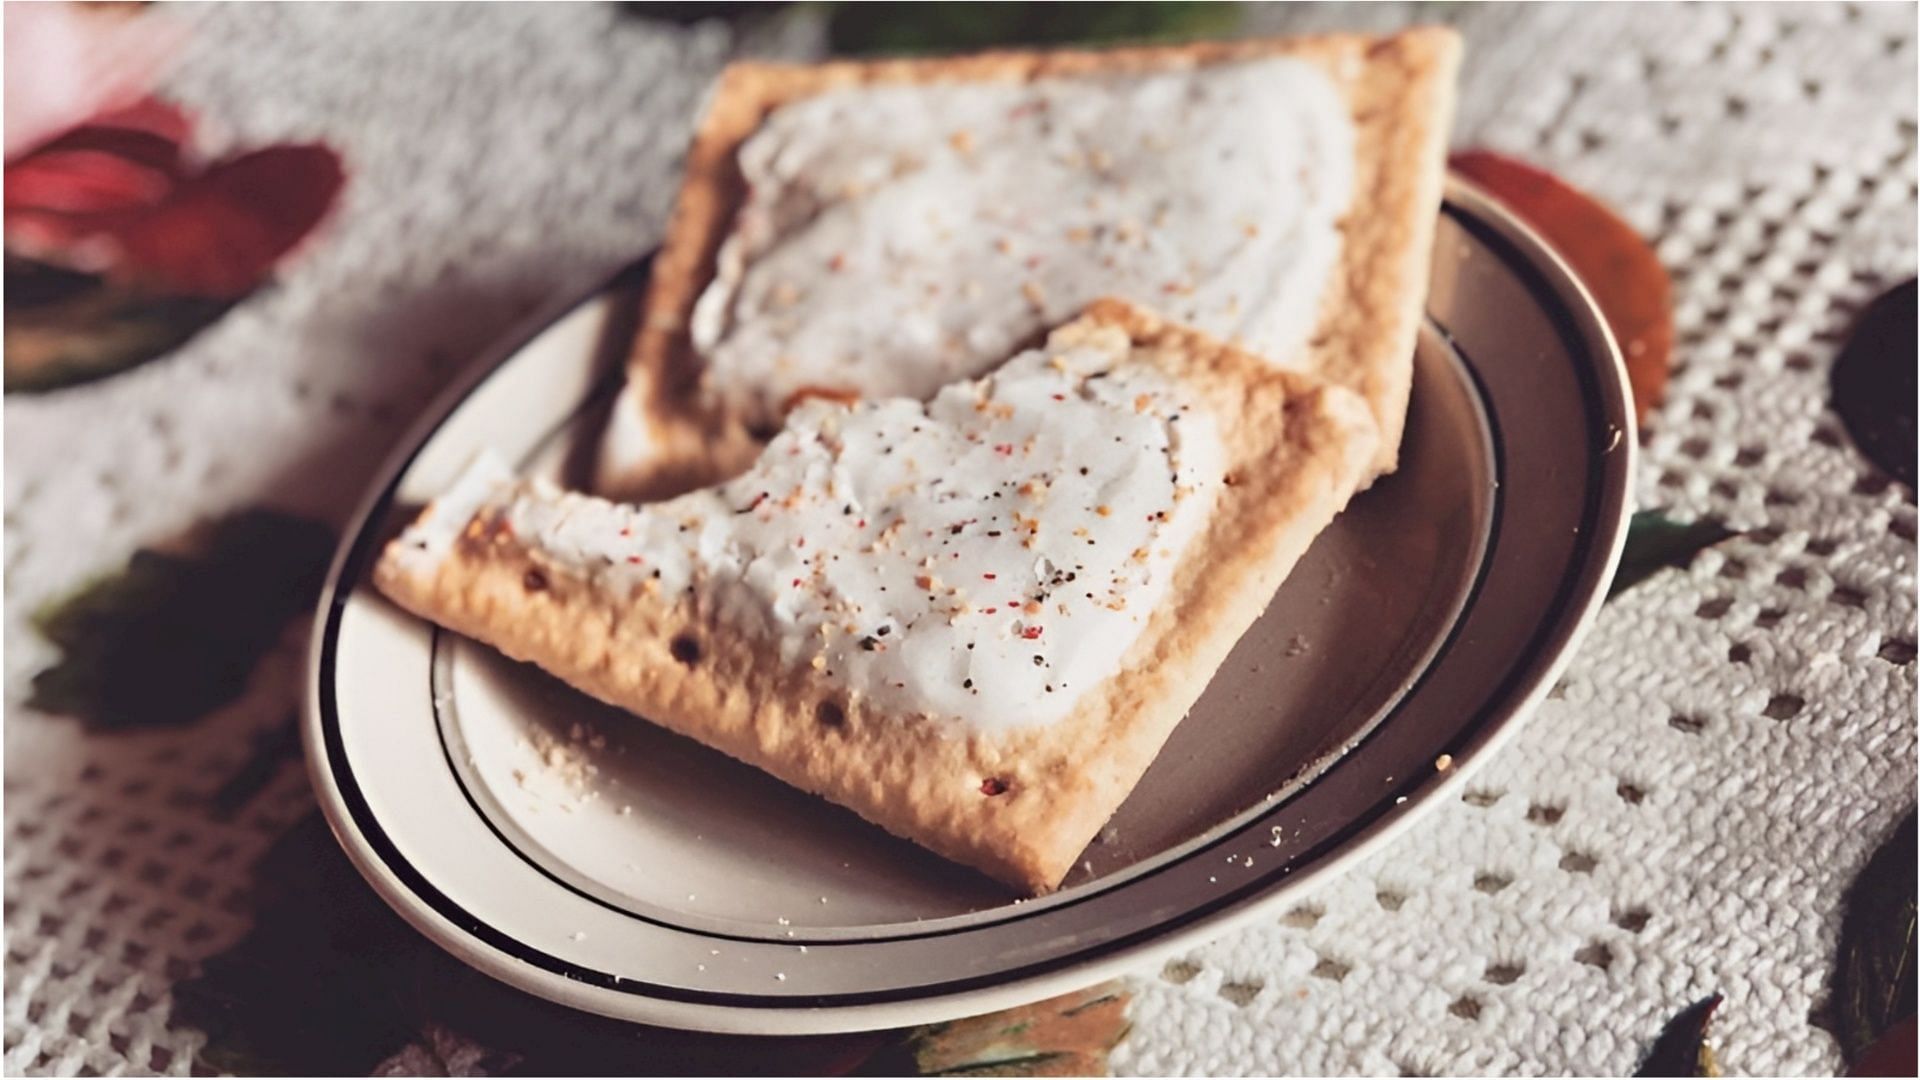 The creator of Pop Tarts has recently died at the age of 94 (Representative image via Pexels)